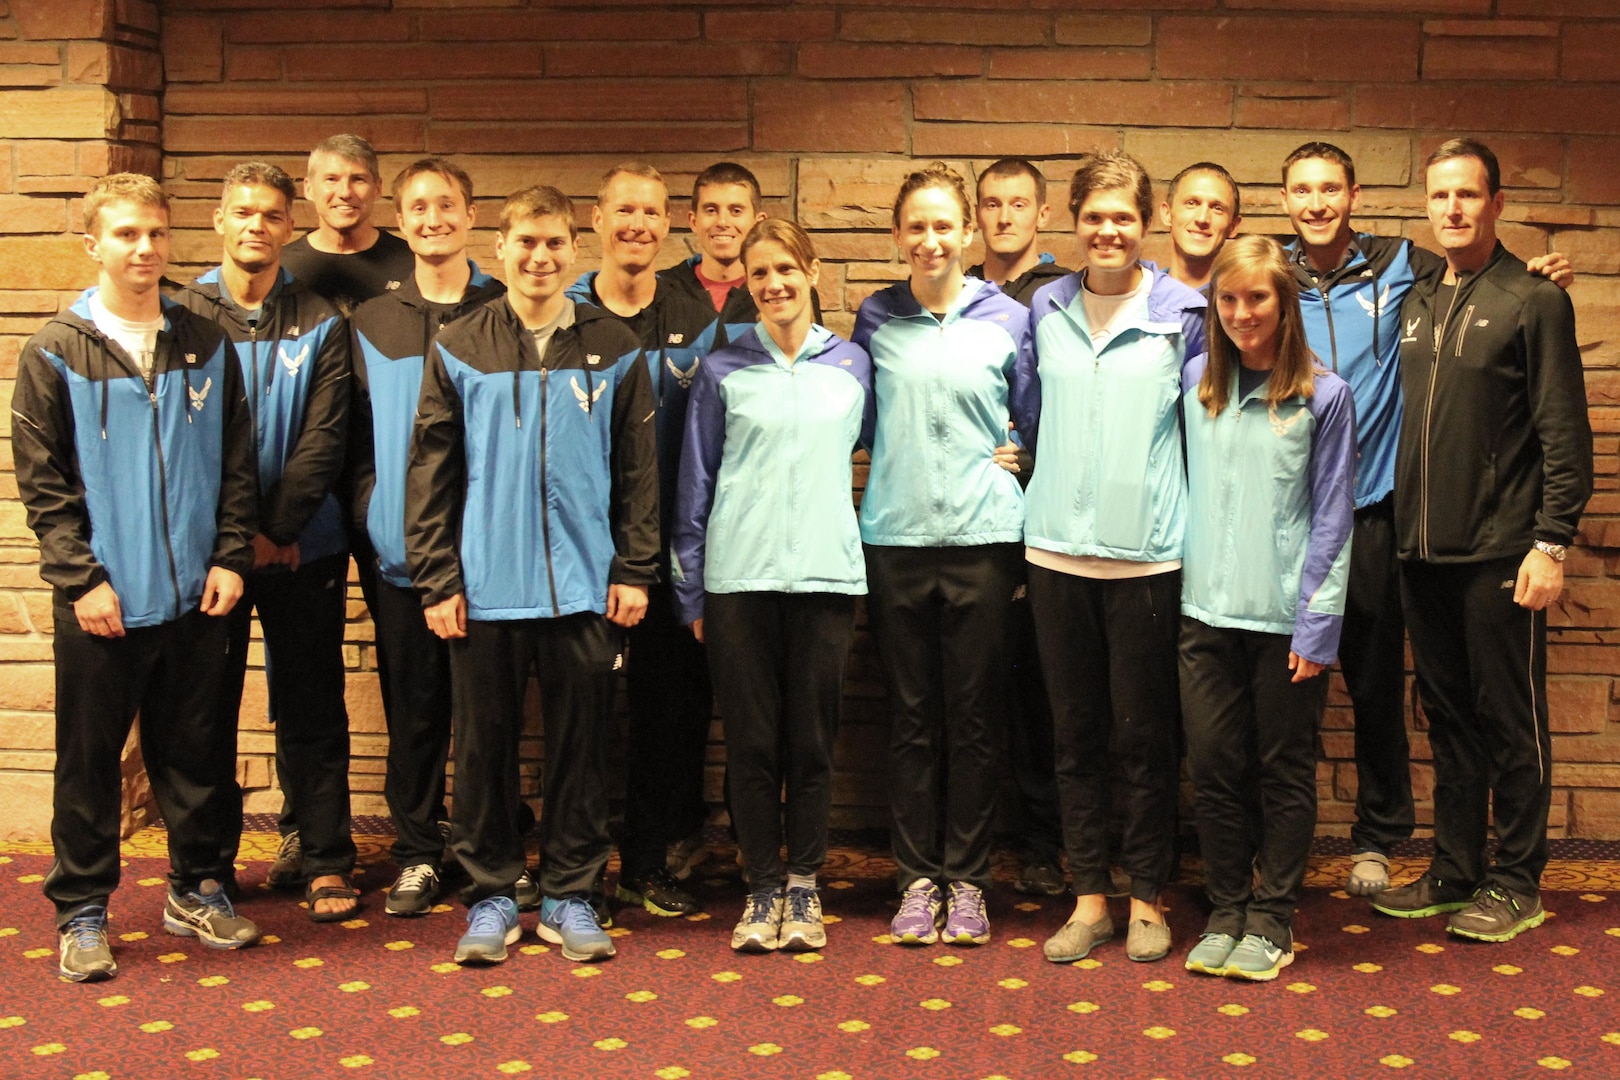 Air Force Men and Women both take team silver medals in the 2014 Armed Forces Cross Country Championship held in conjunction with the USA Track and Field Cross Country National Championship on 15 February in Boulder, Colo.